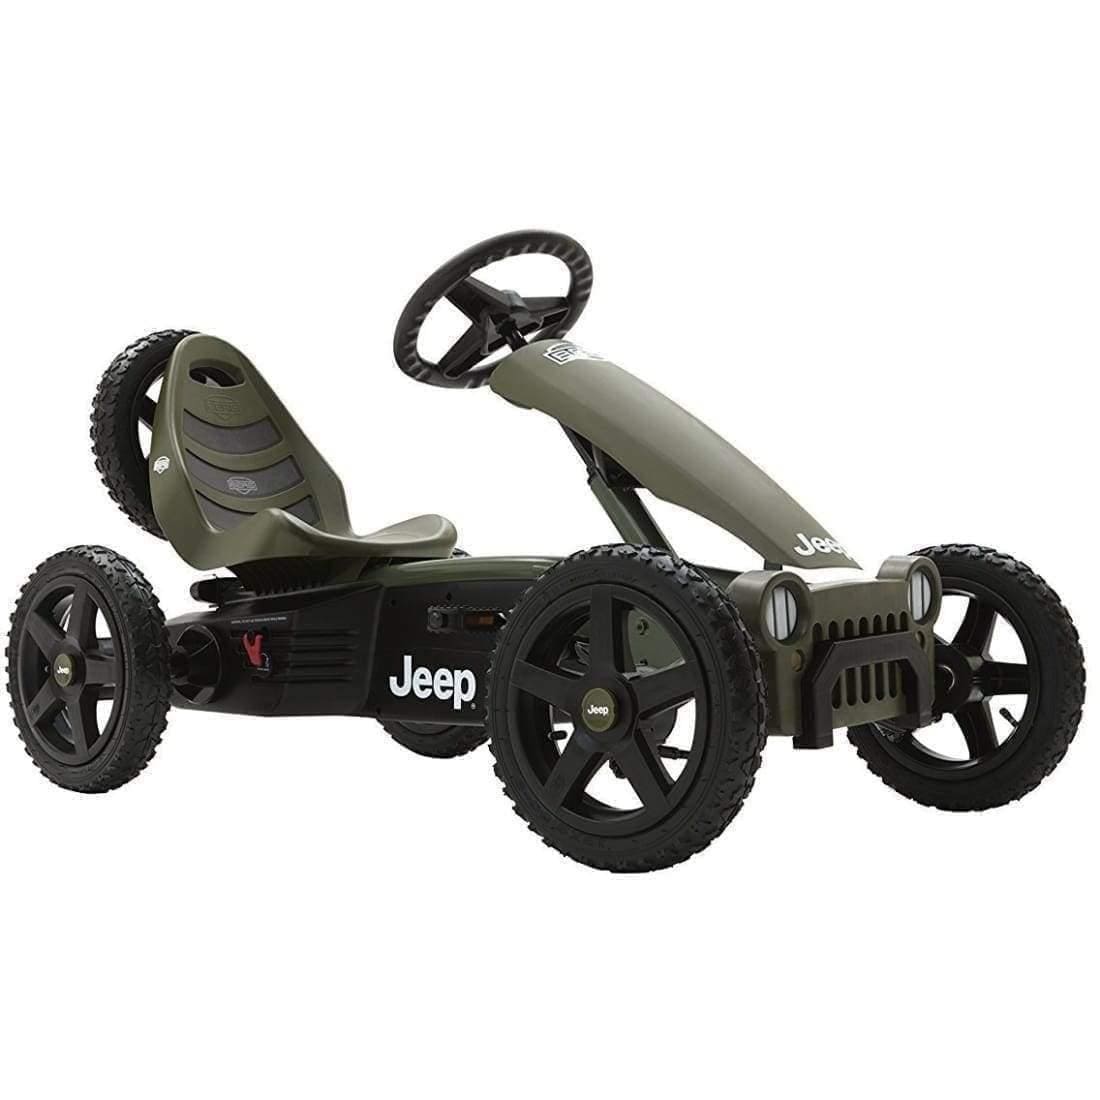 Pedal Karts By BERG, Free Shipping